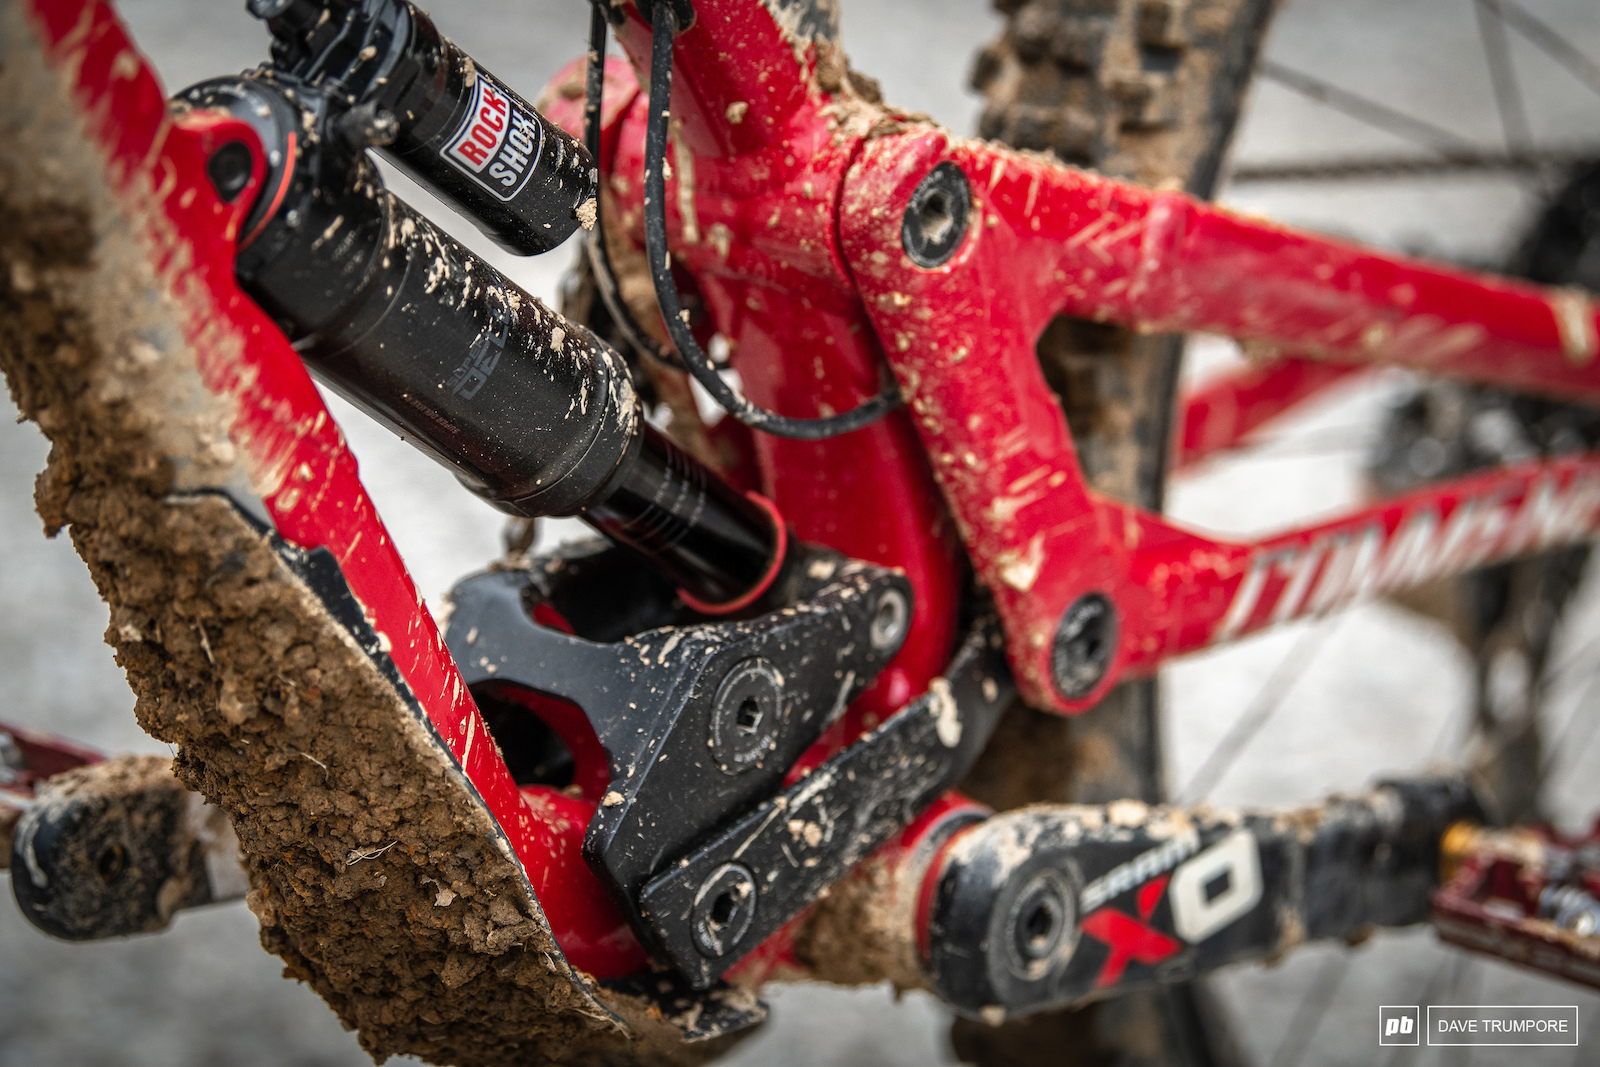 Amaury Pierron - Commencal linkage and Rockshox rear shock (note difference to Vali Holl's)